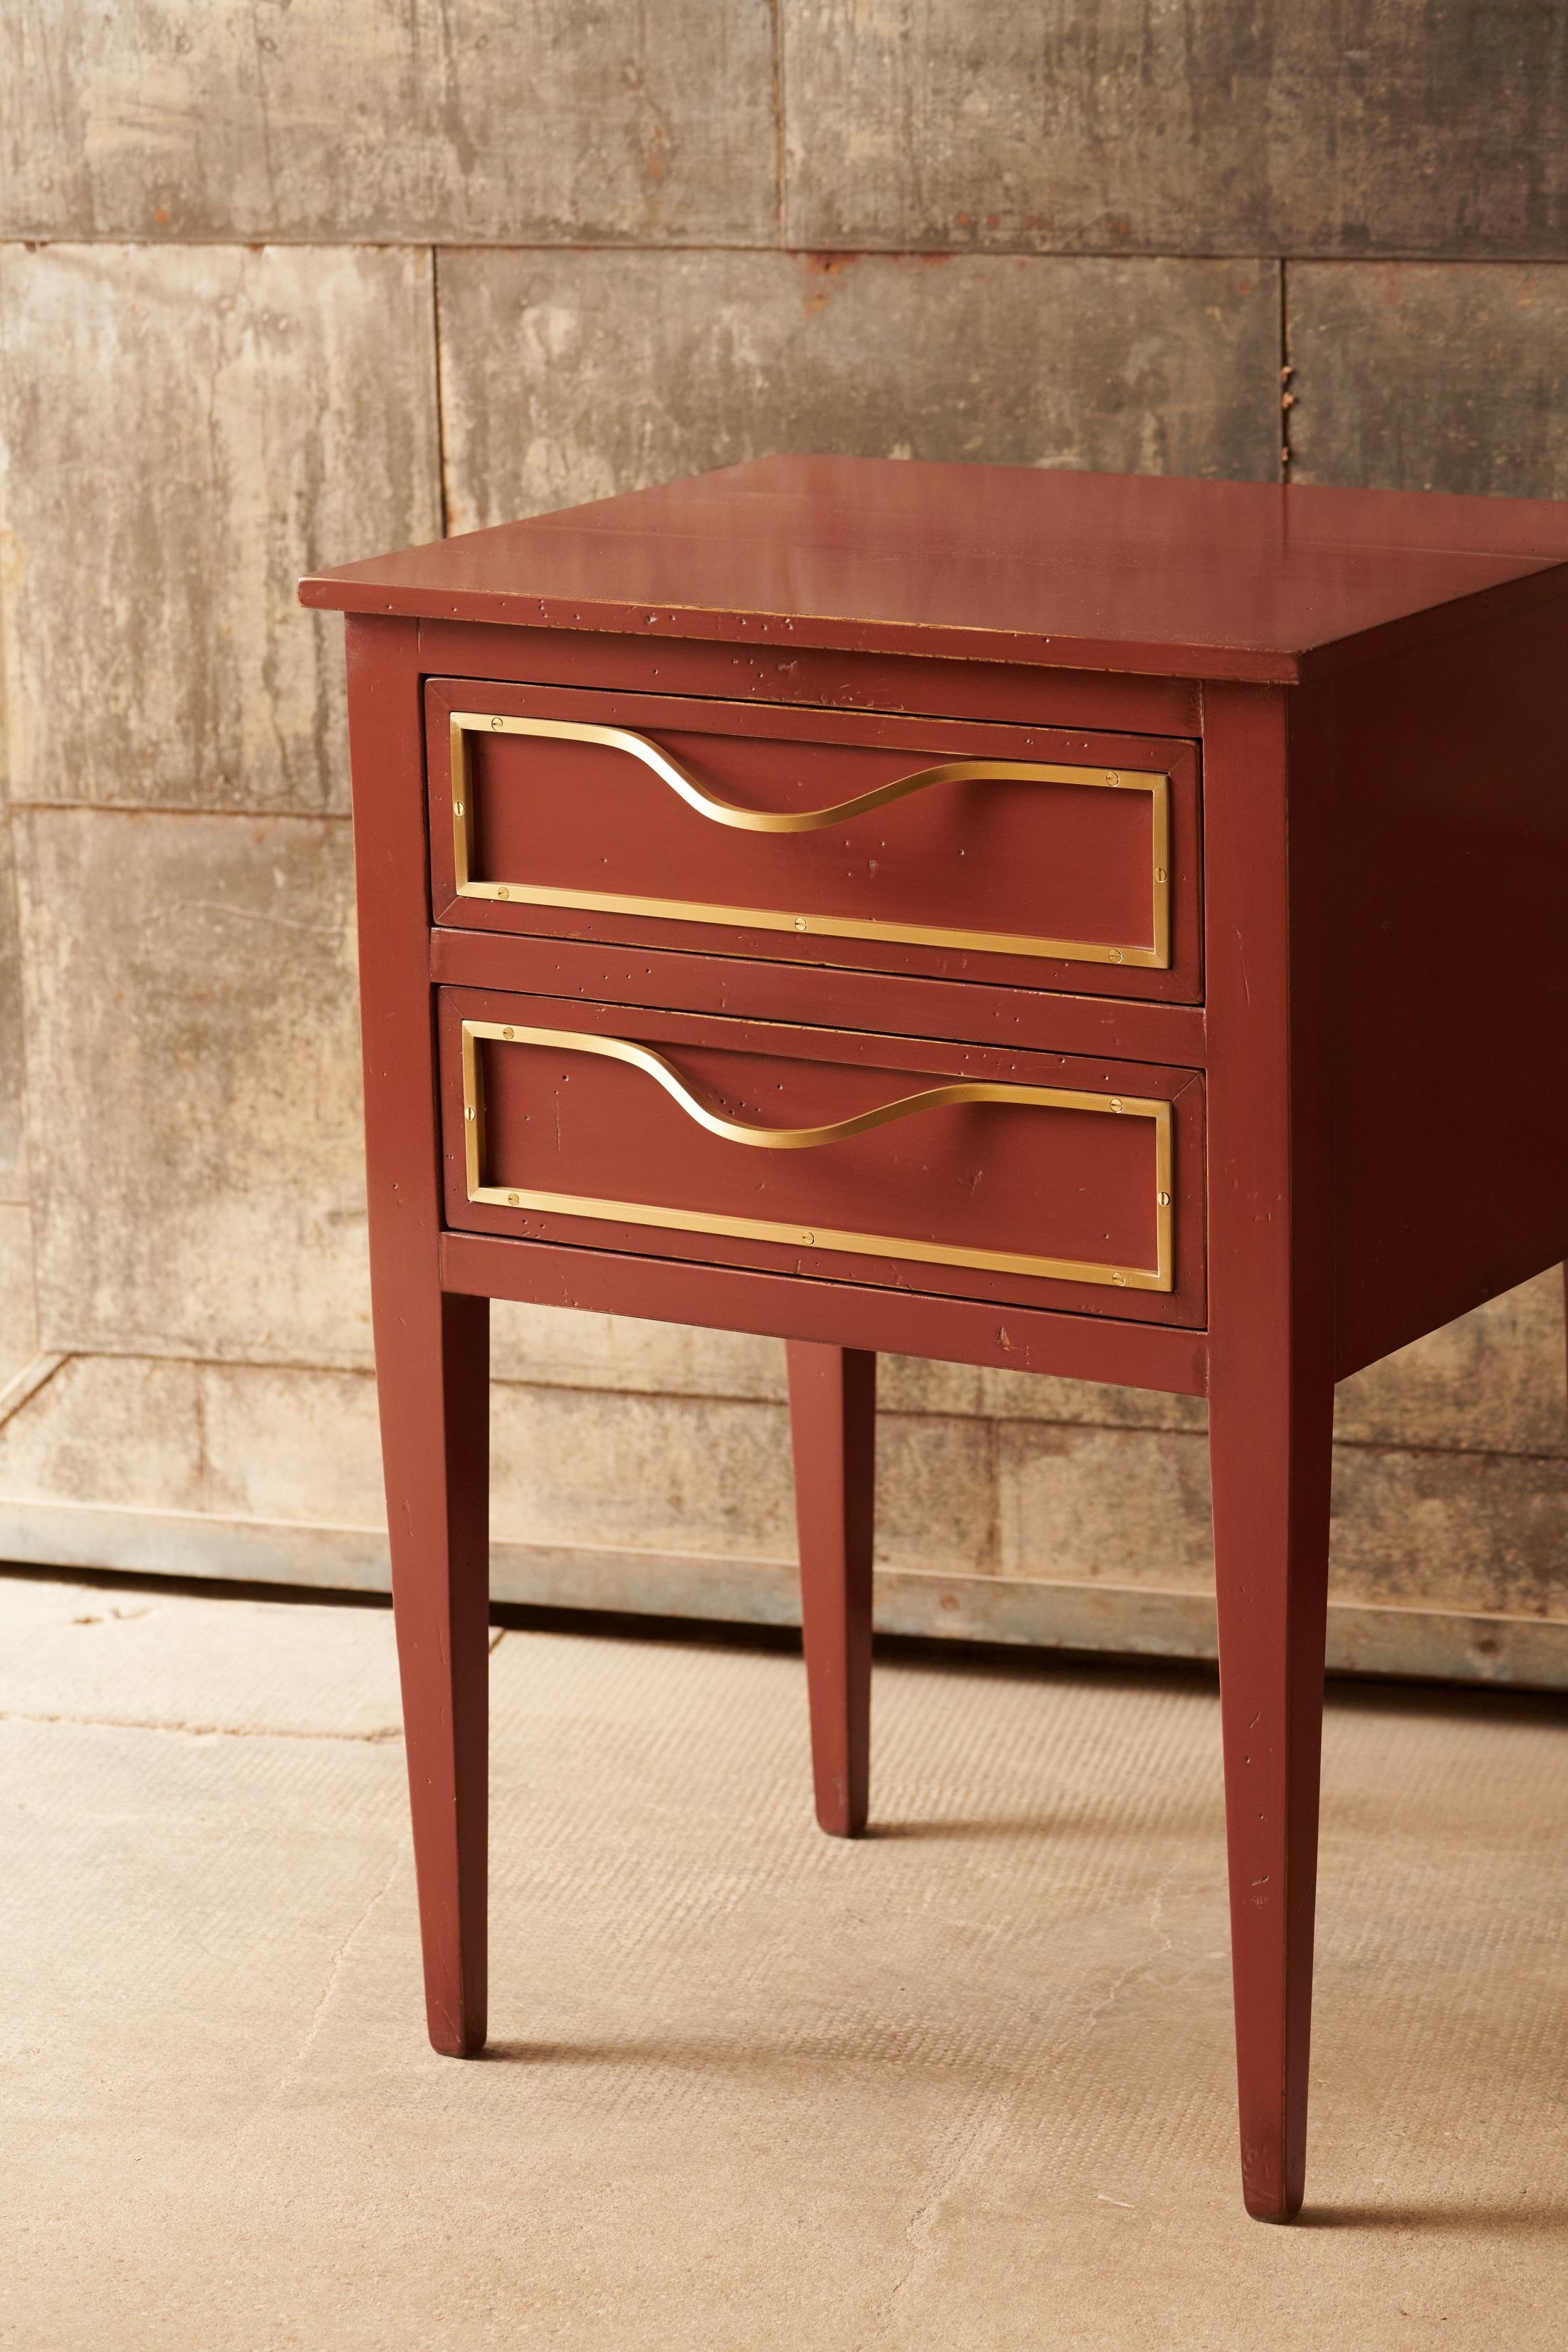 Garance lacquered beech sideboard with two drawers. Brushed brass frame handle. 
It is a piece of furniture made by hand by the craftsmen of Moissonnier, French cabinetmaker since 1885. Our craftsmen use ancestral know-how and have developed a